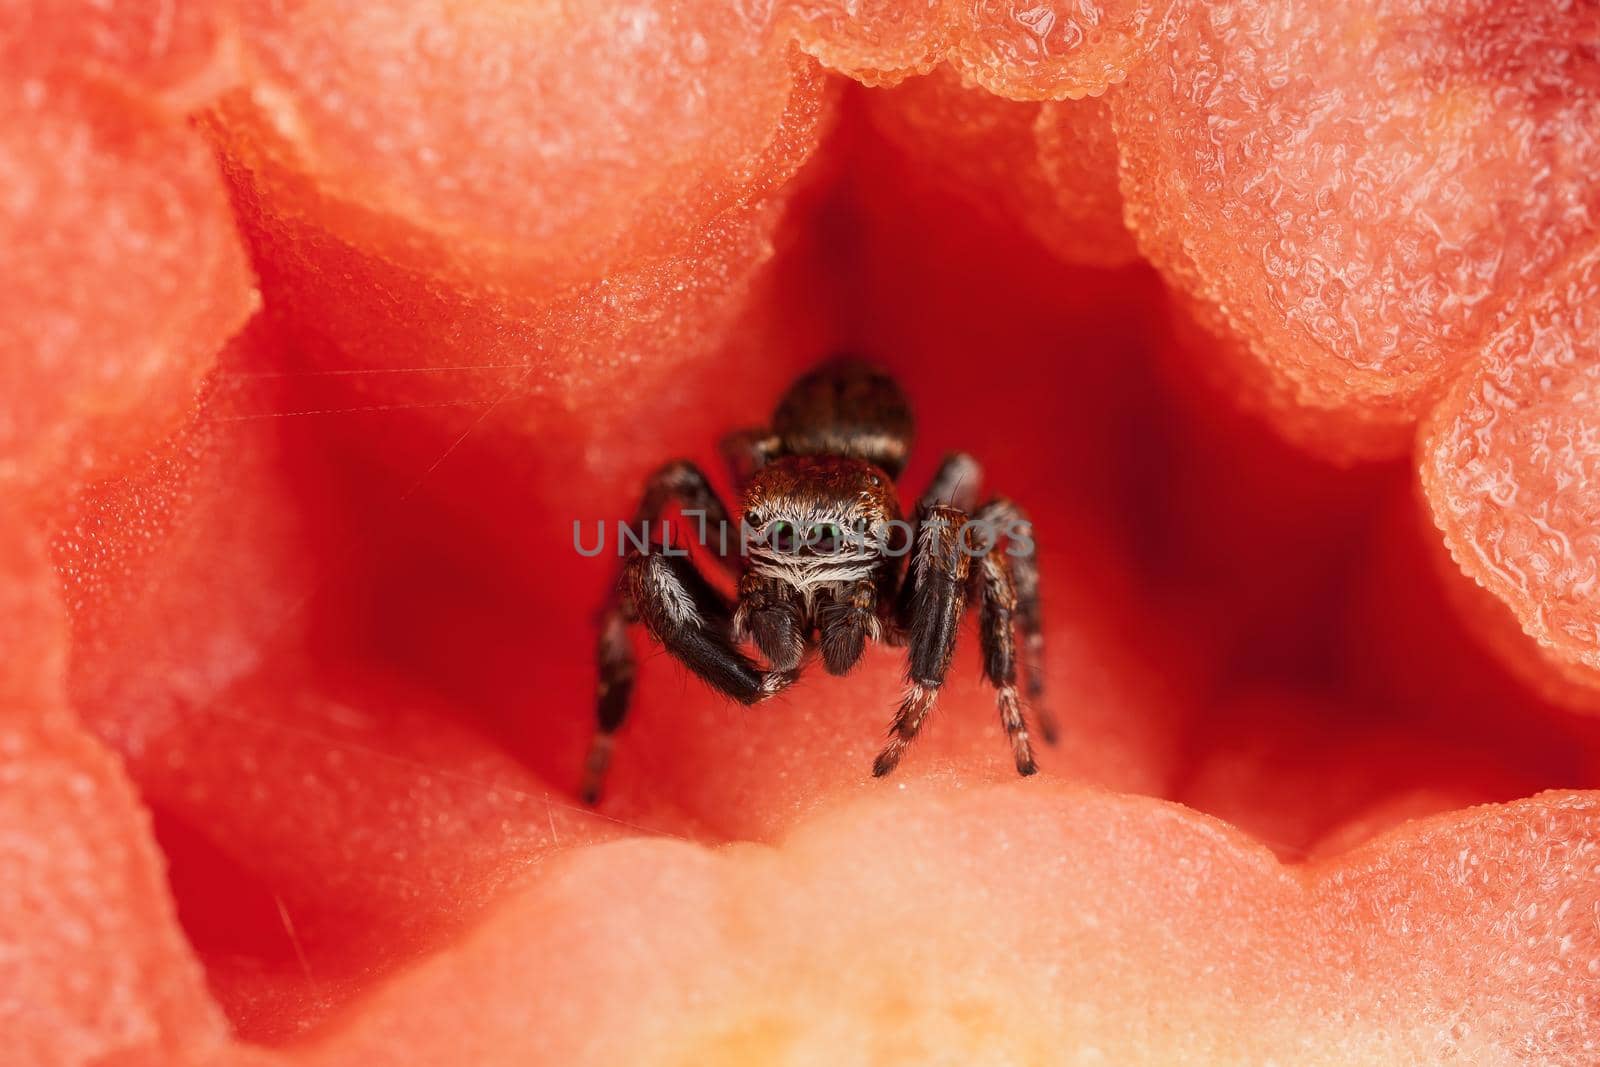 Jumping spider inside the tomato, resembling a beautiful red scene